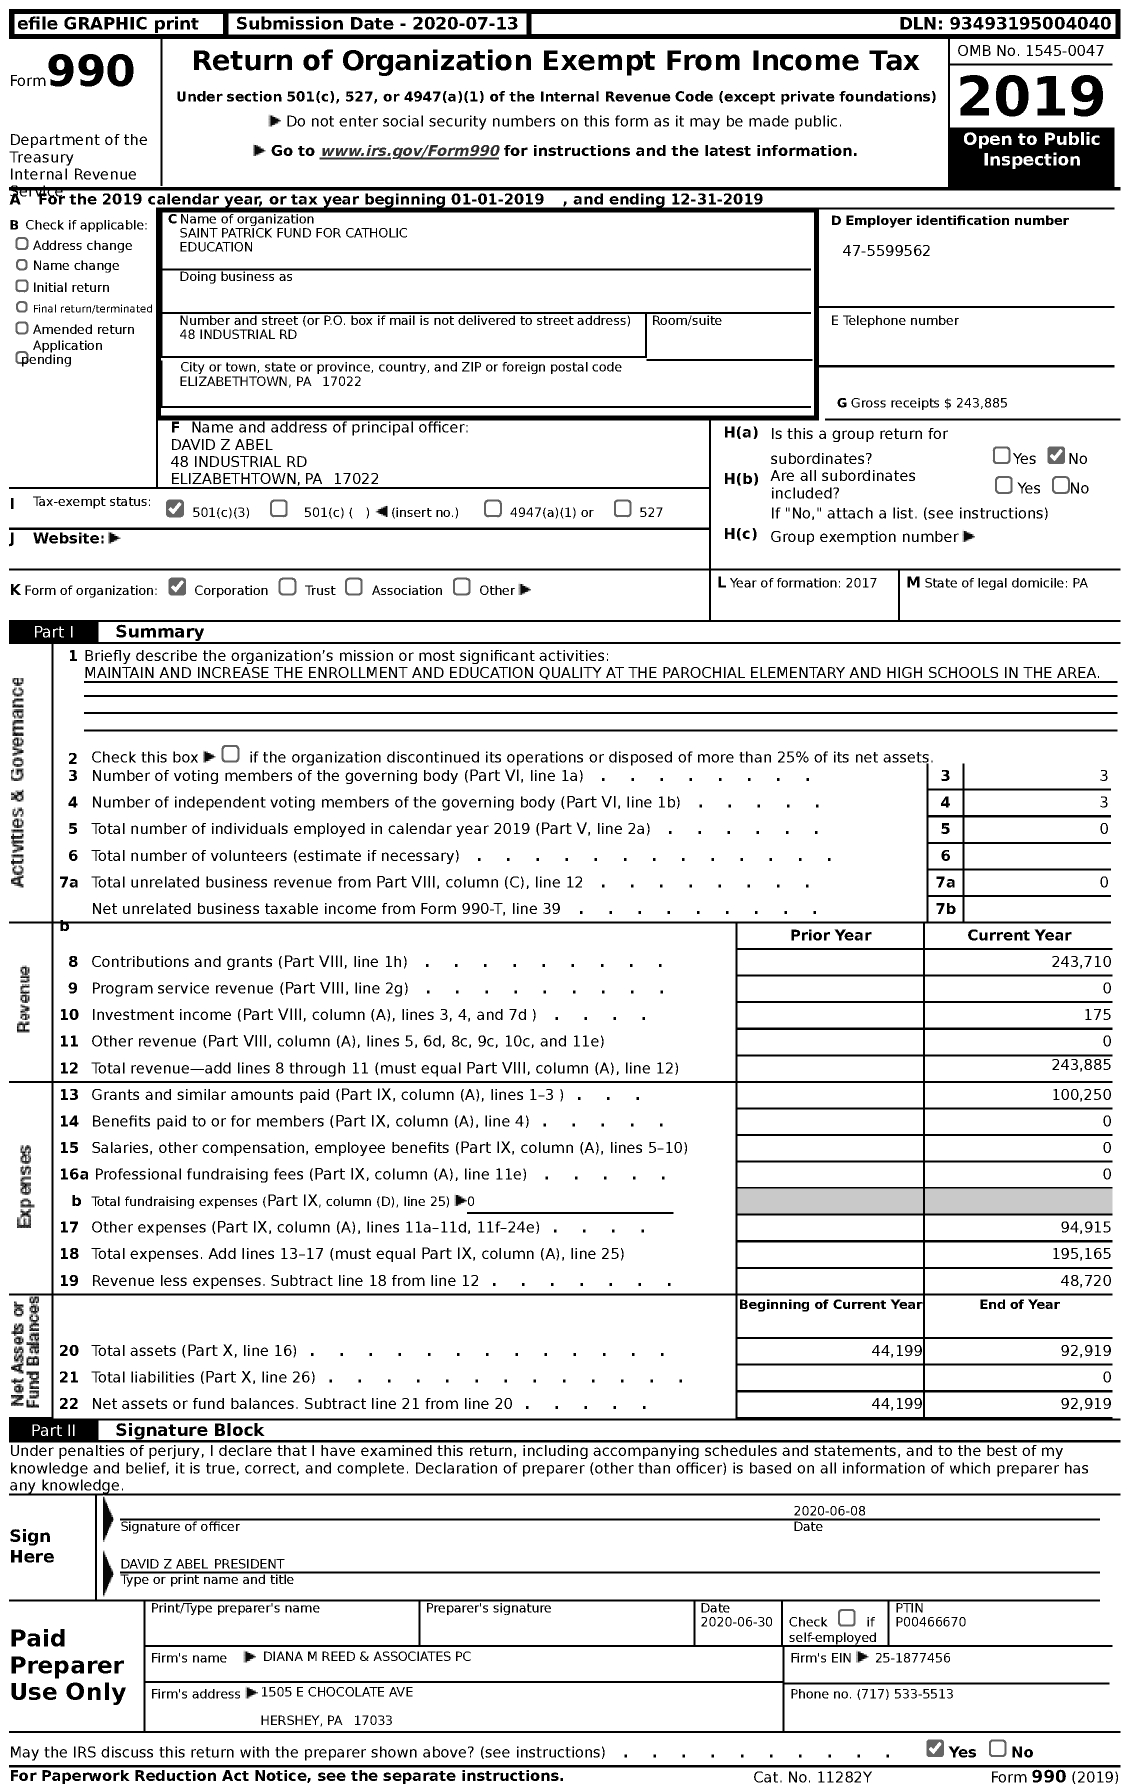 Image of first page of 2019 Form 990 for Saint Patrick Fund for Catholic Education